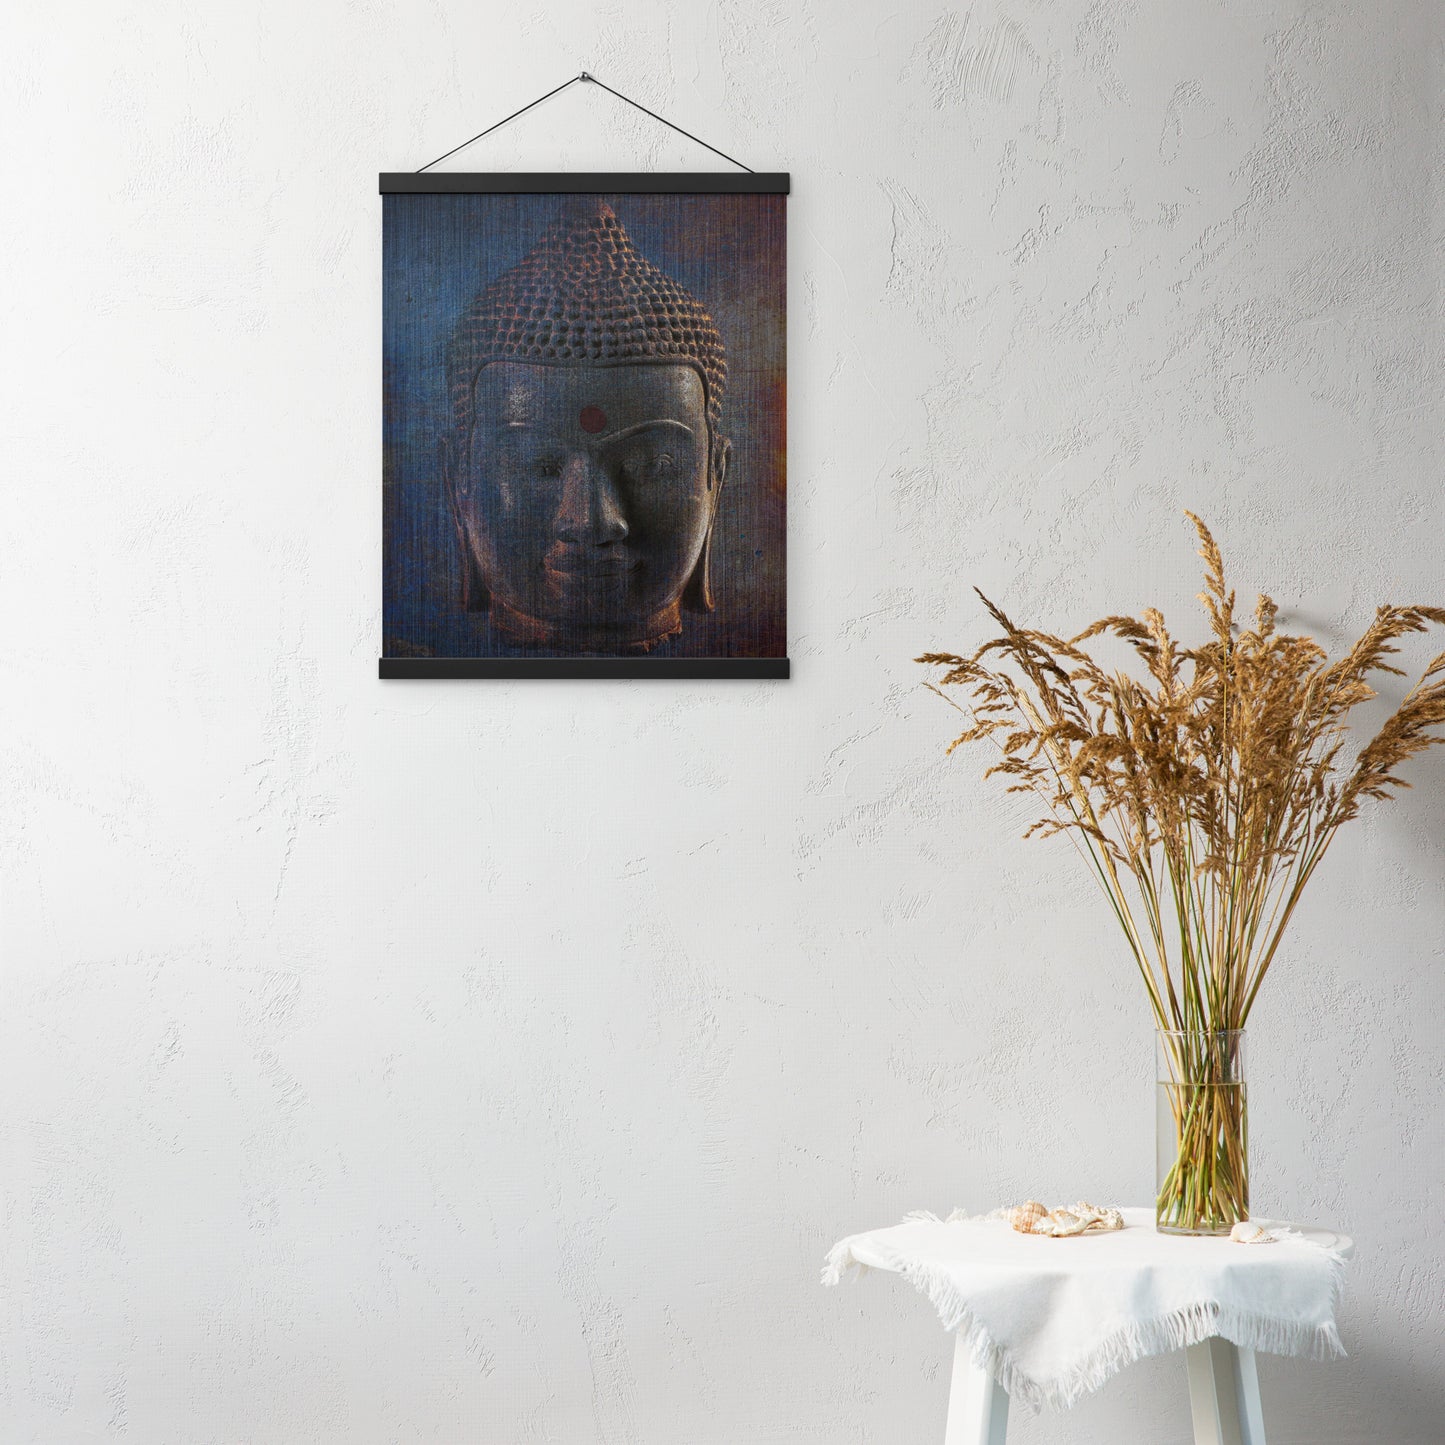 Spiritual and Meditation Wall Artwork Modern Art Blue Buddha Head Printed on Archival Paper with Magnetic Wood Hangers 16x20 hung